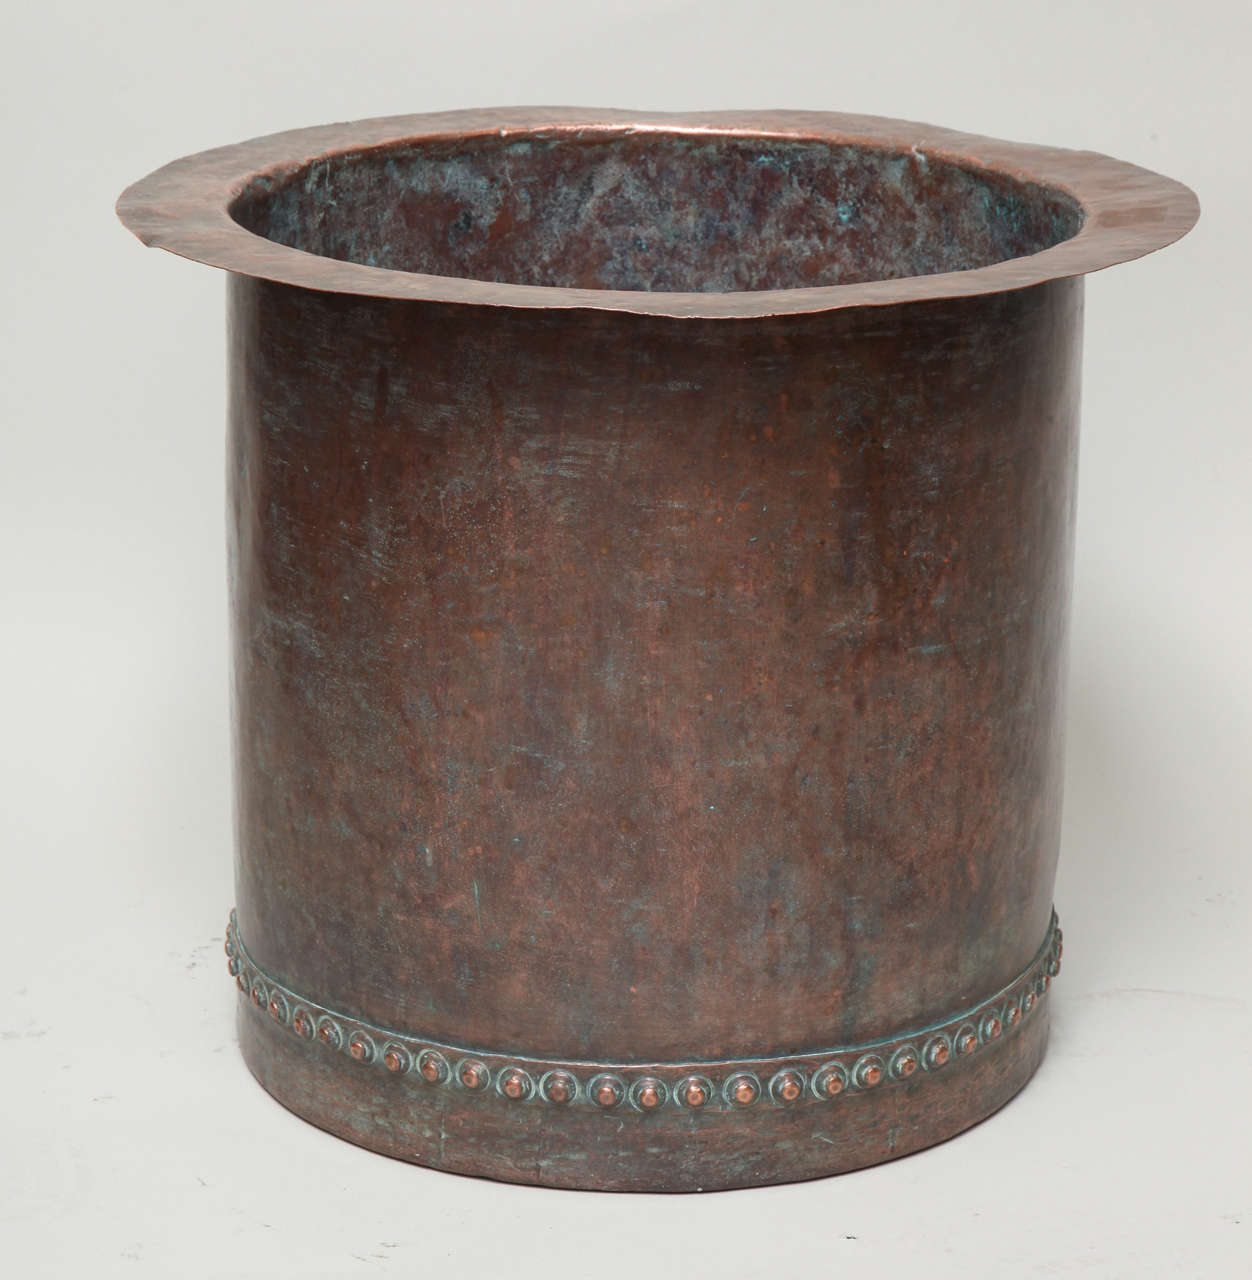 A fantastic riveted copper oversize log bin having beautiful bronzed patina, England, early 19th century.